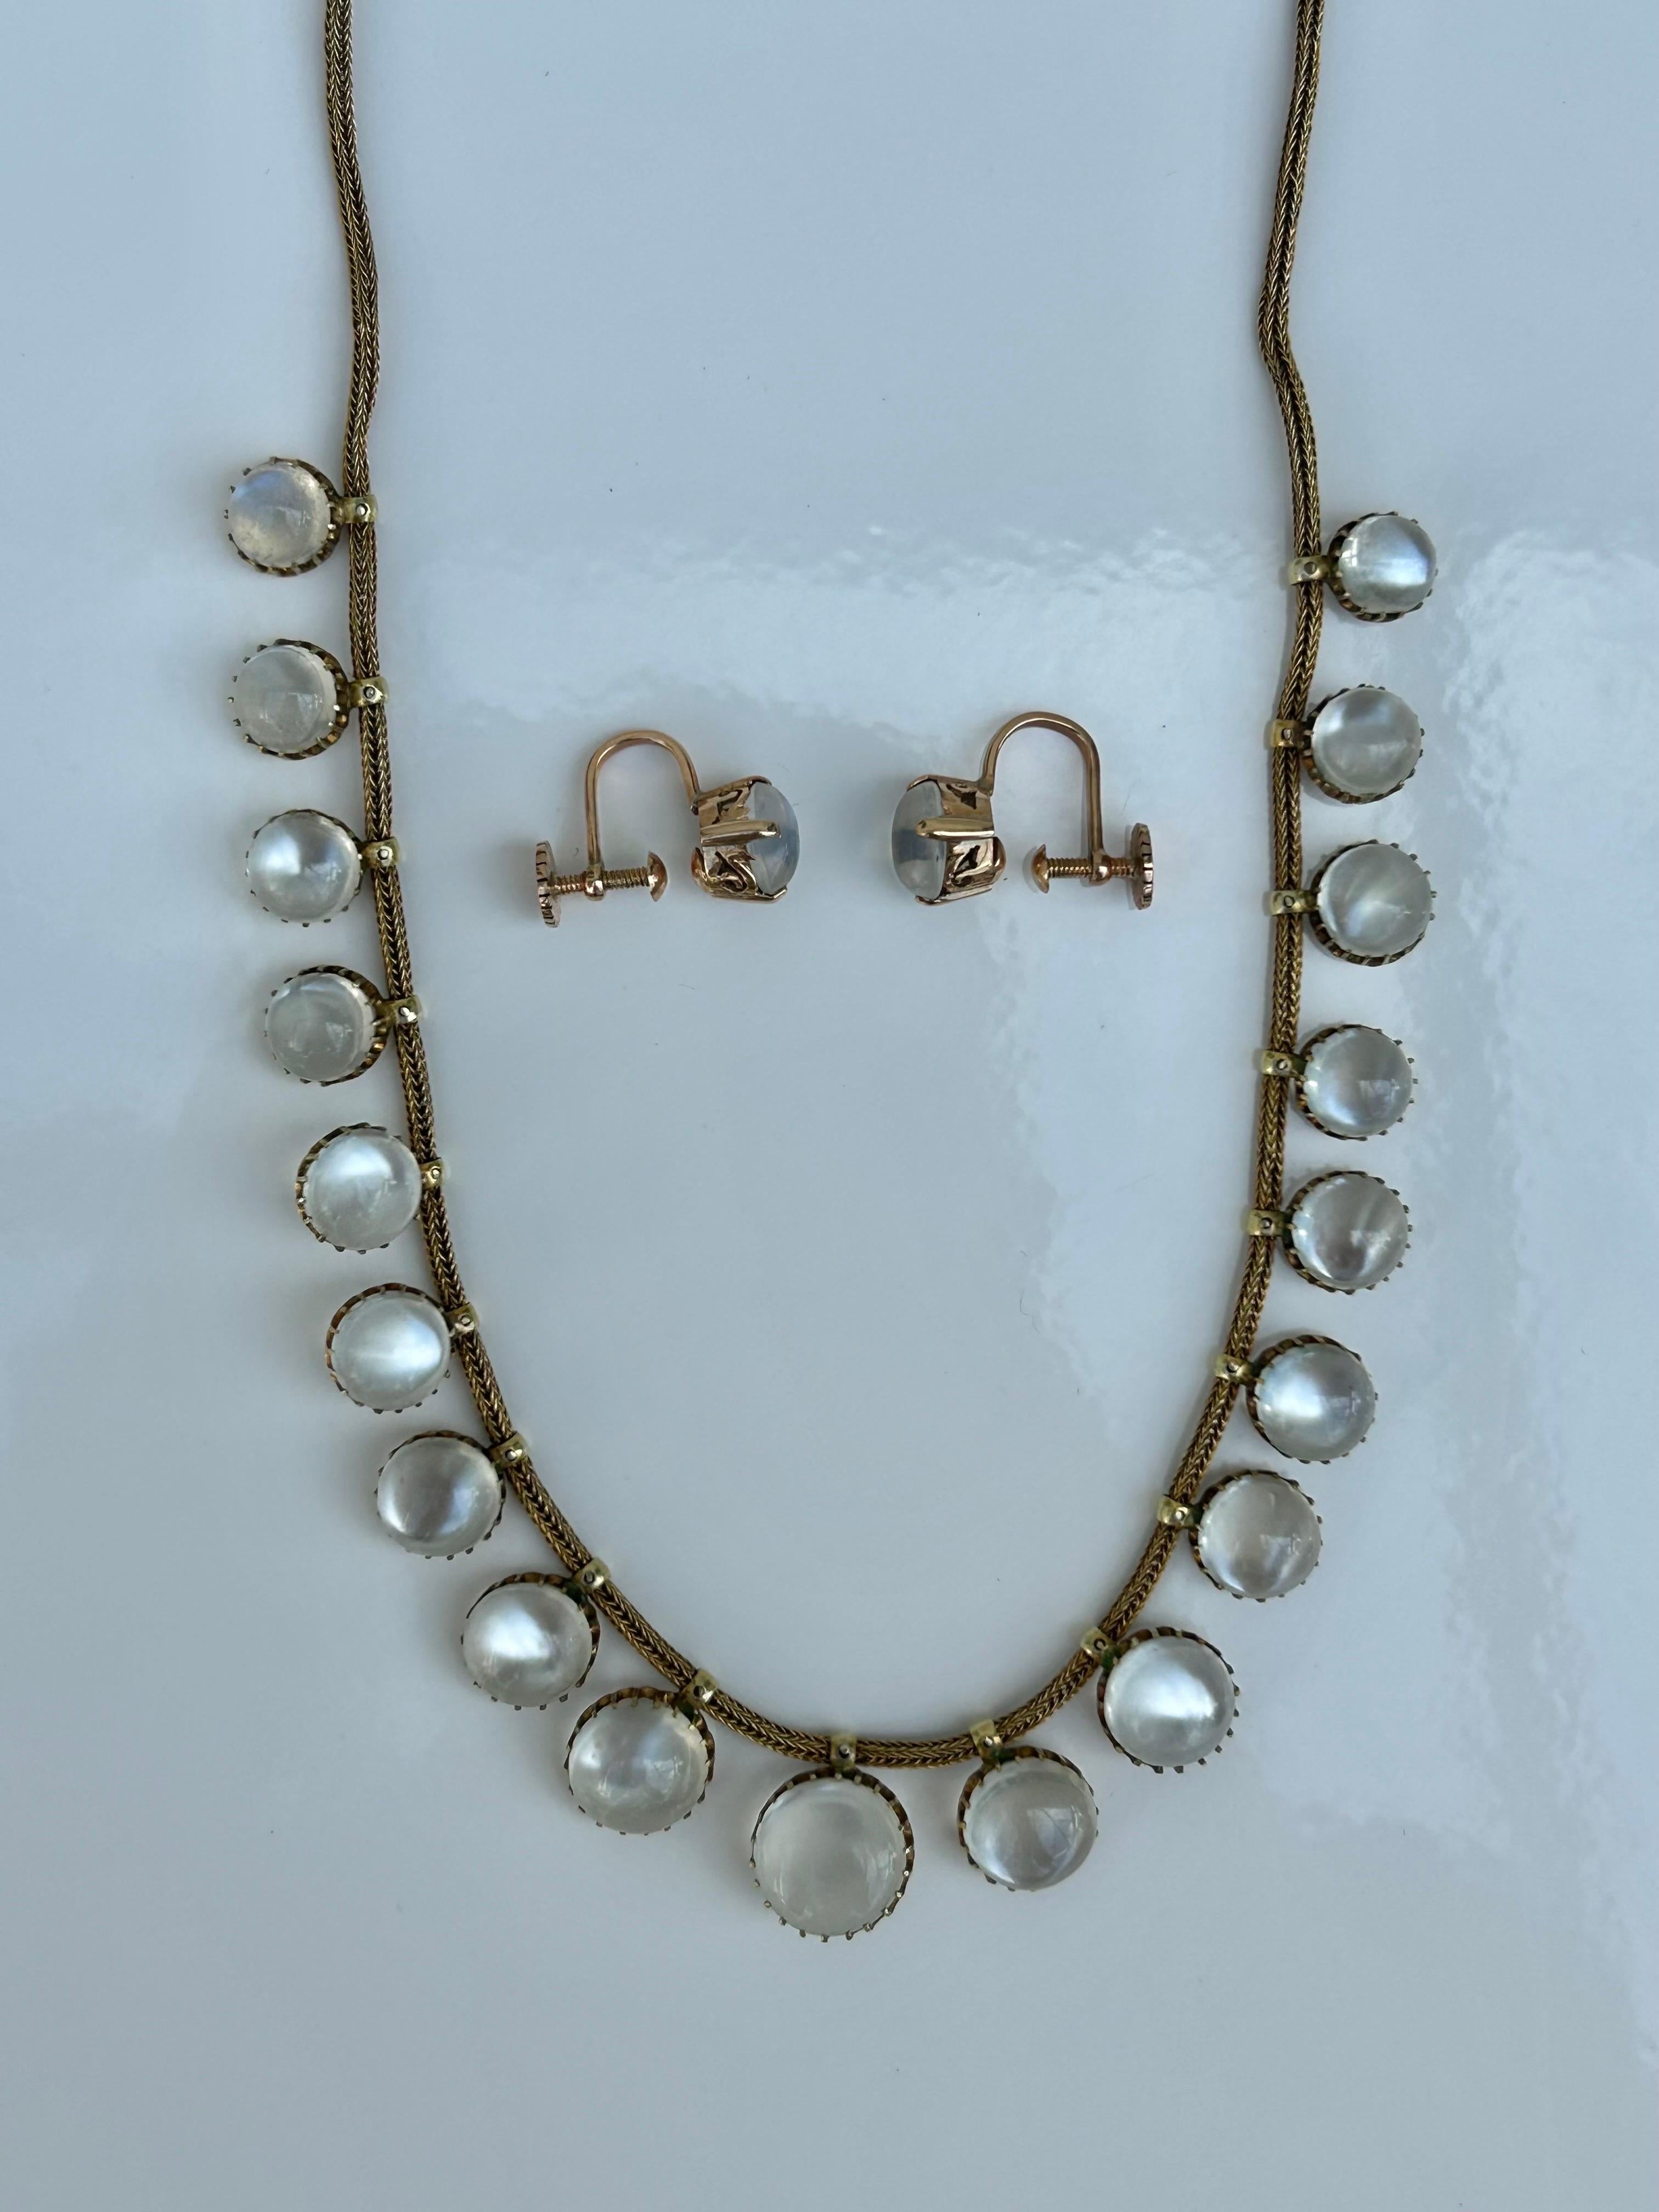 Outstanding Antique 15 Carat Yellow Gold Moonstone Necklace and Earrings Set 3